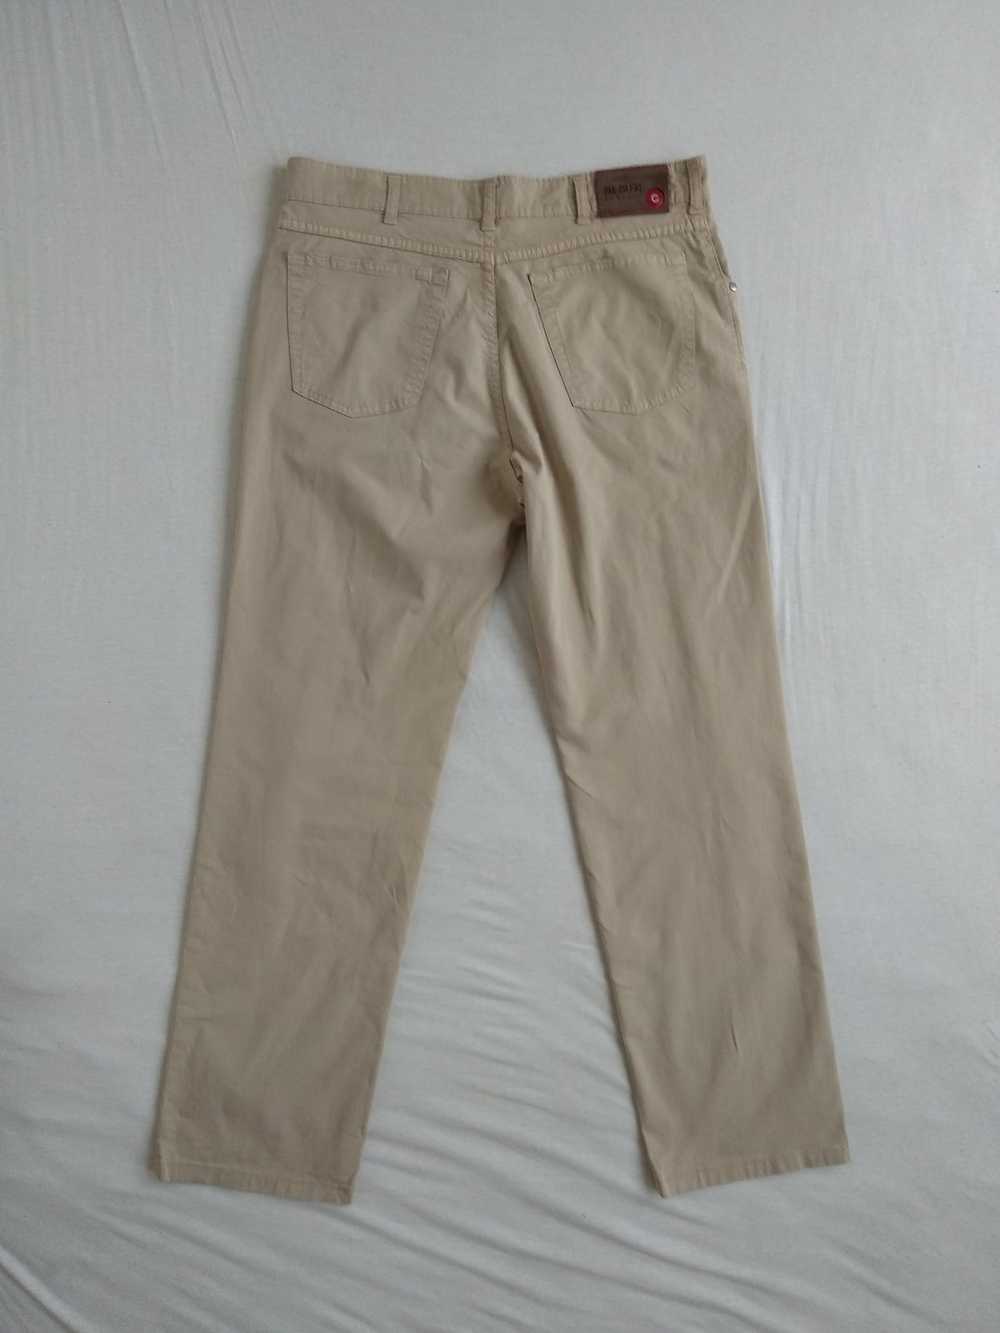 Pal Zileri Concept - Trousers Pants Chinos - MADE… - image 2